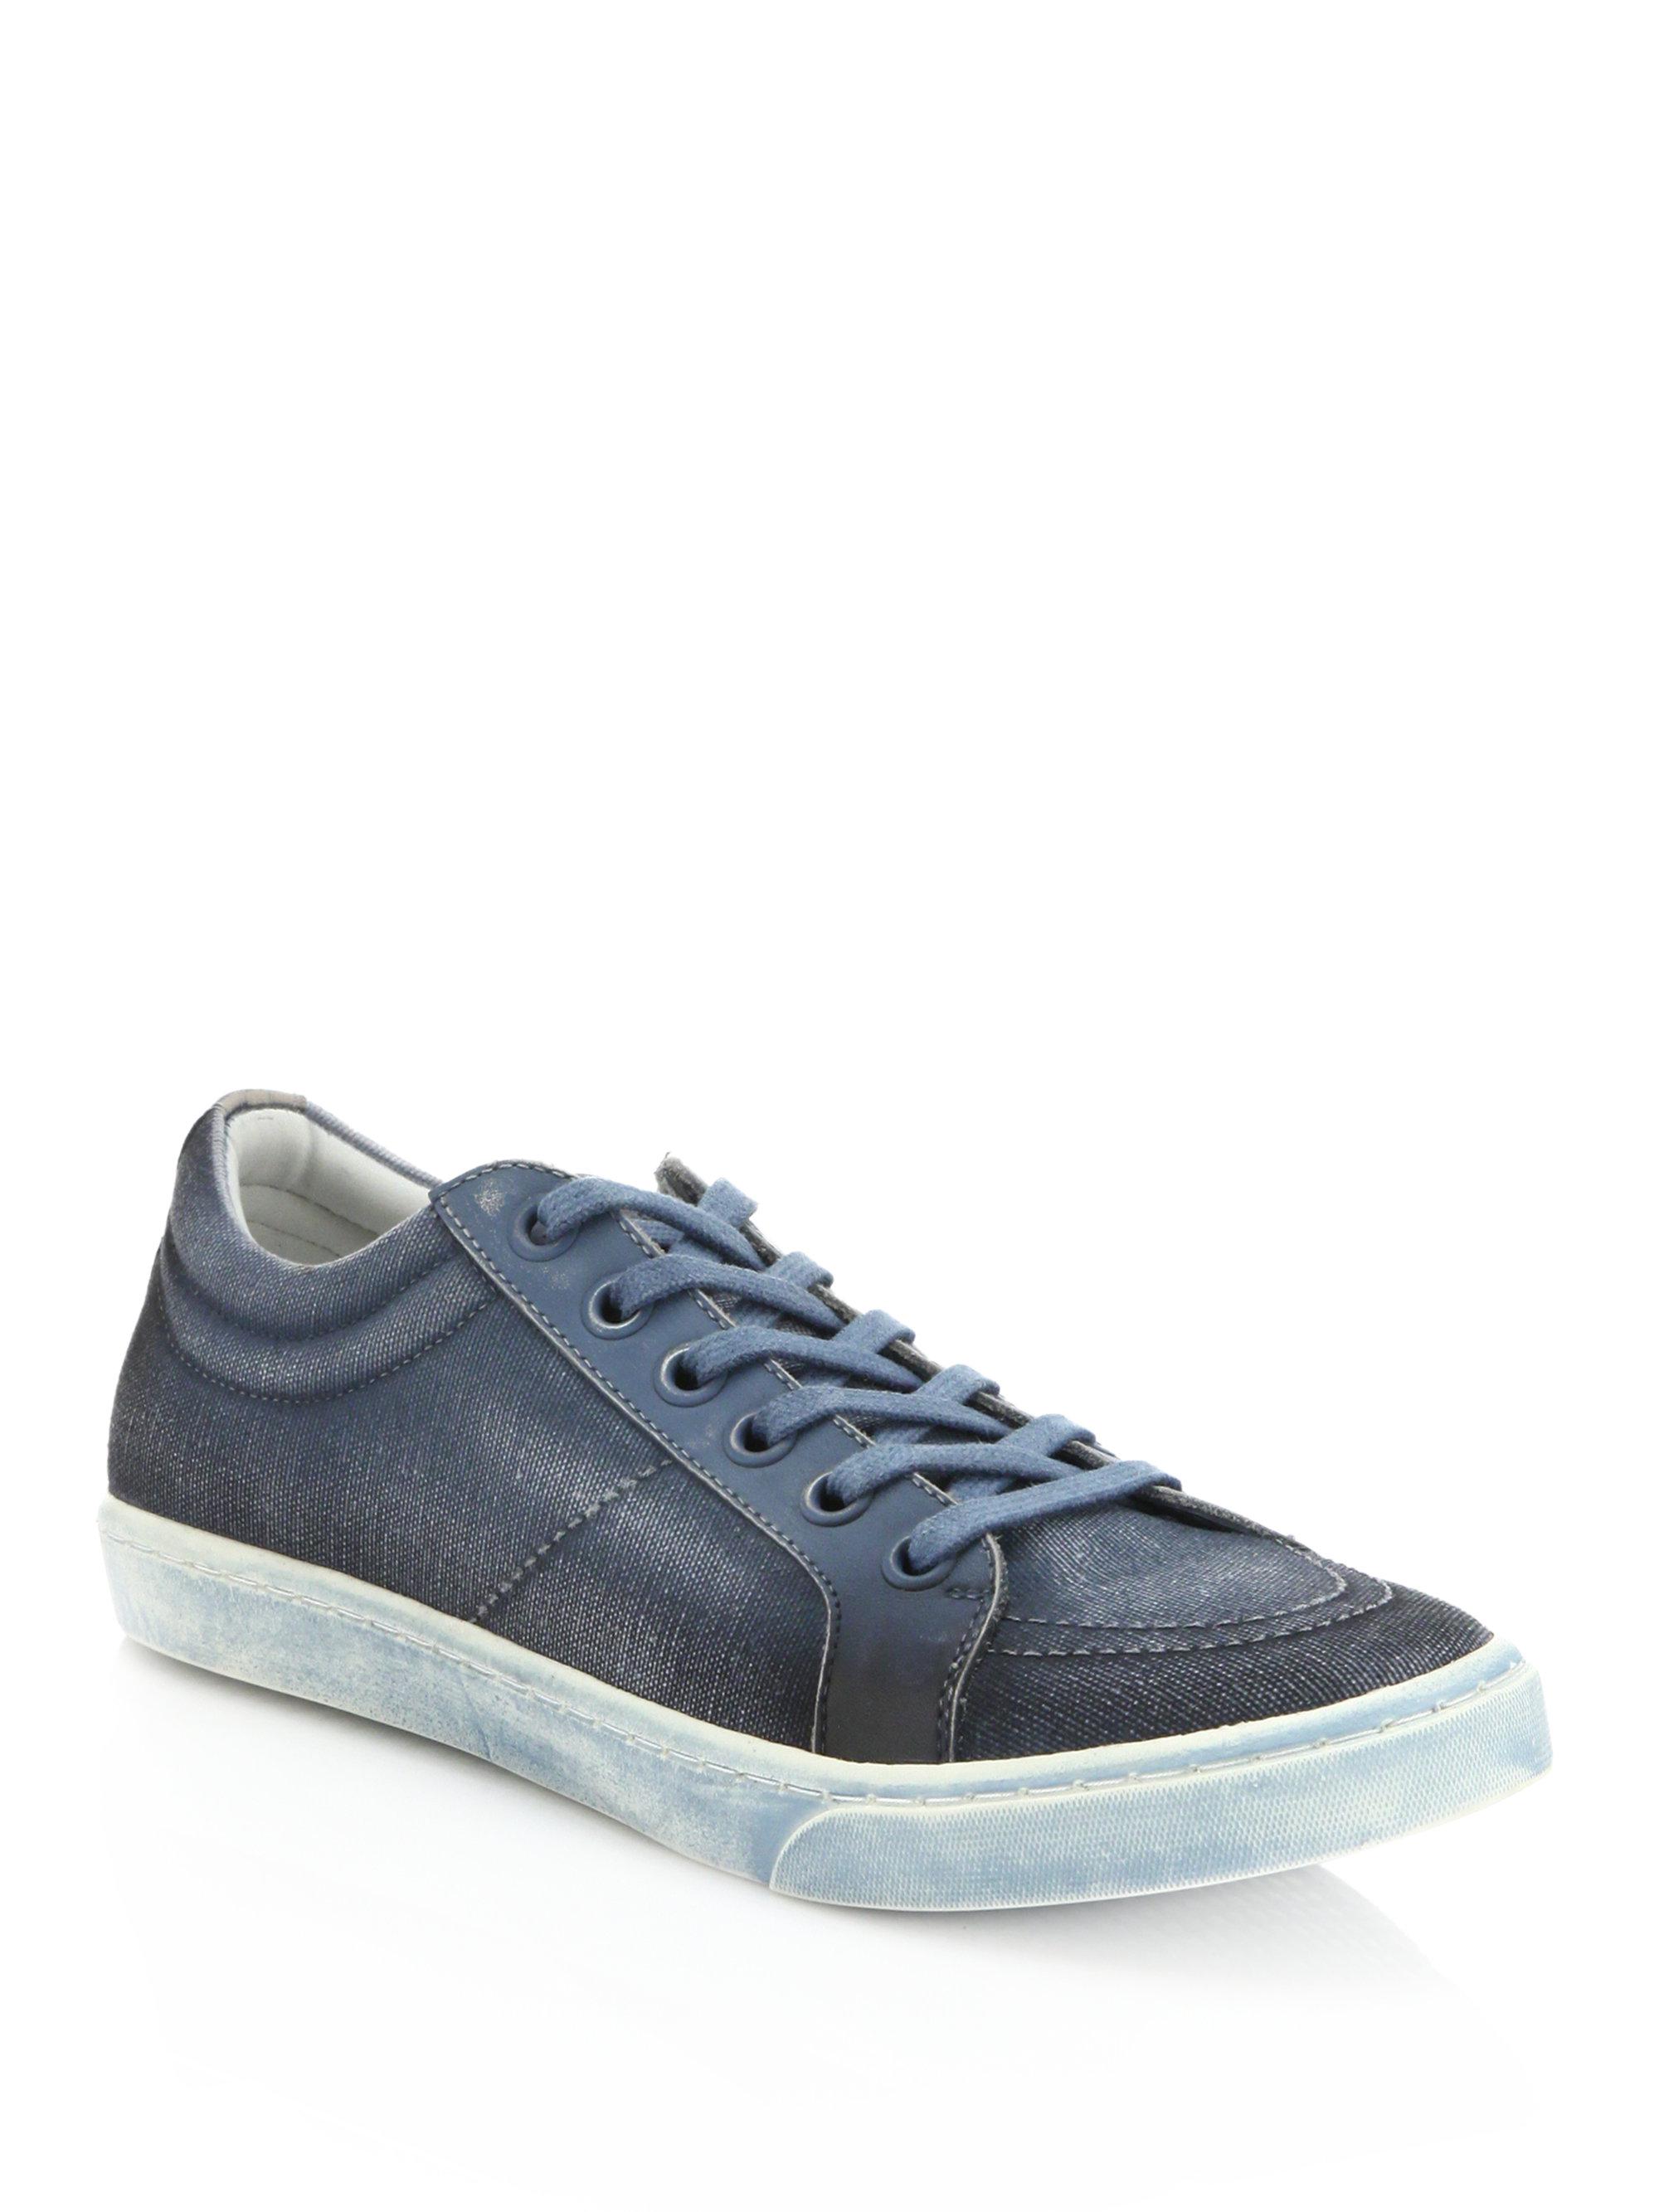 Lyst Madison Supply Canvas Spray Paint Sneakers in Blue